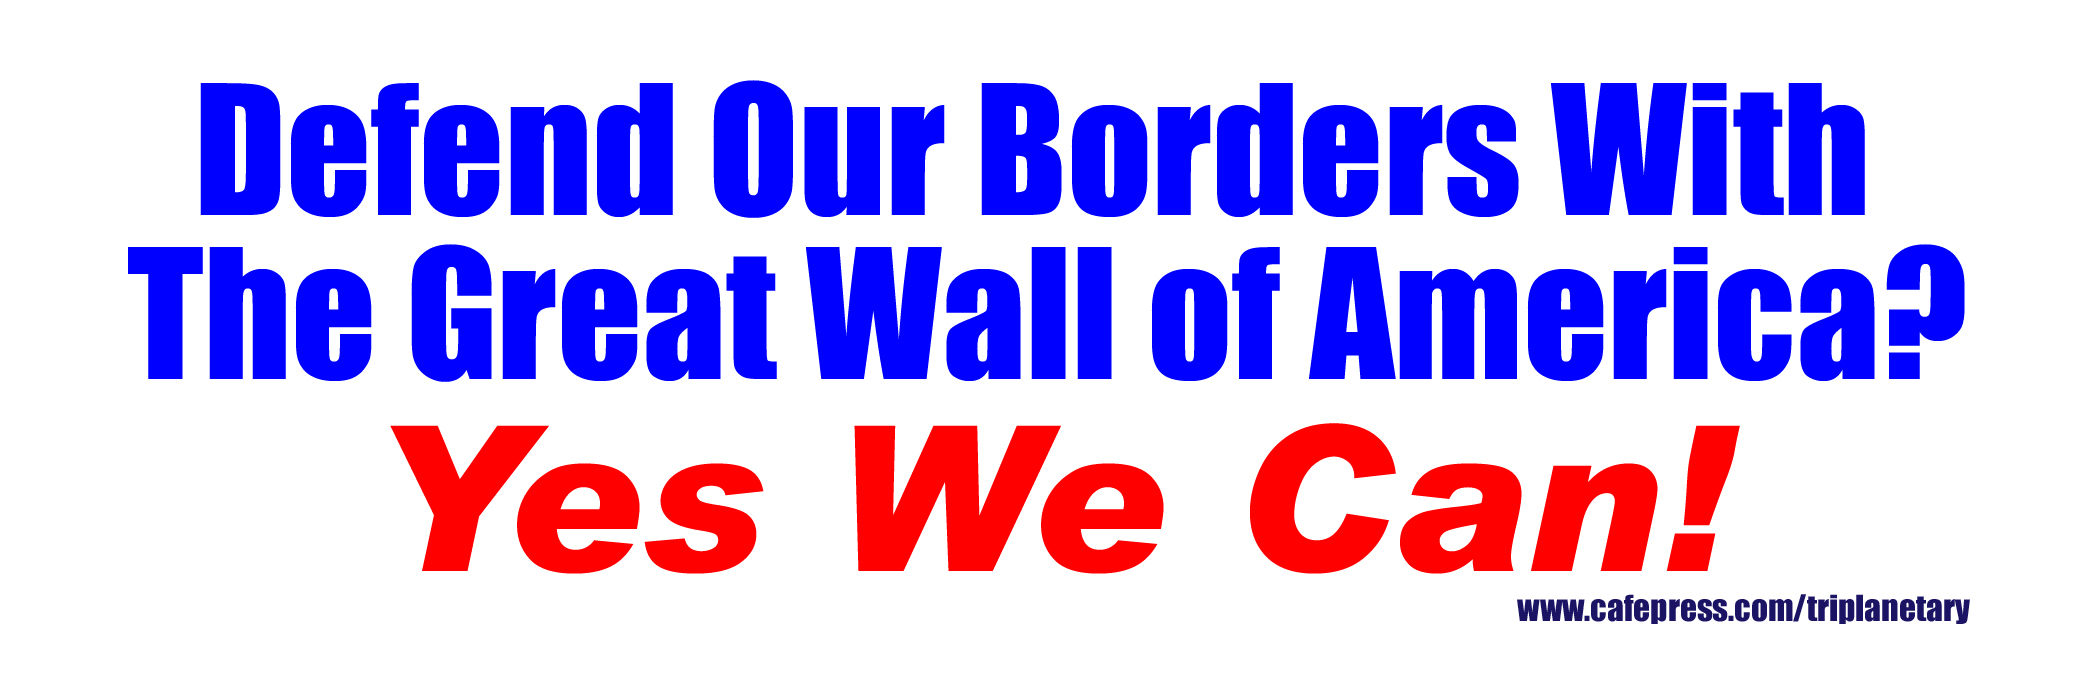 Red, white, and blue image of bumper sticker: 'Defend Our Borders With the Great Wall of America?'